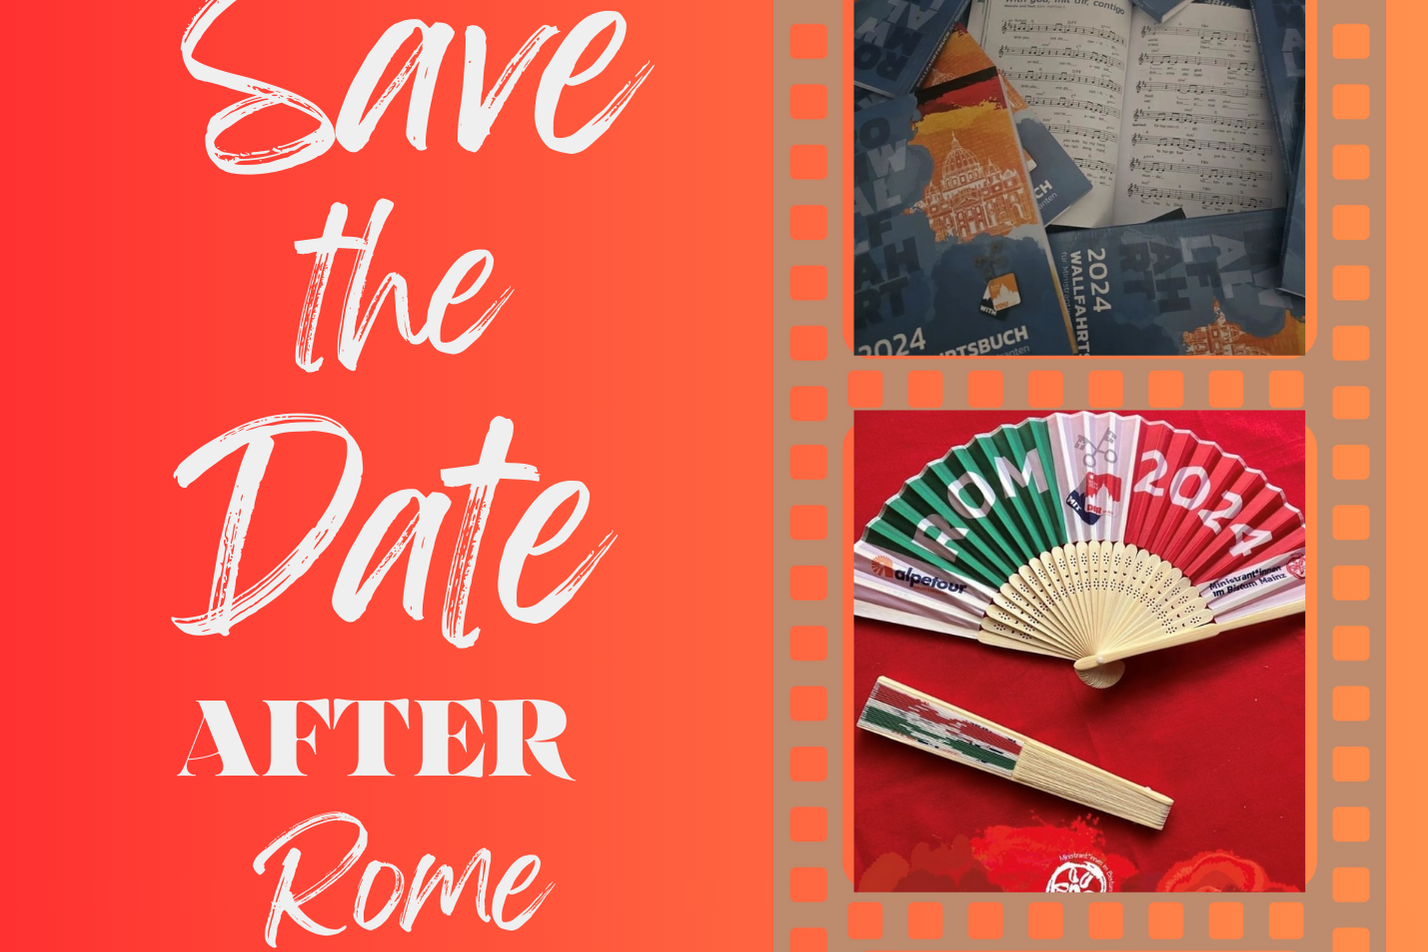 Save the Date After Rome